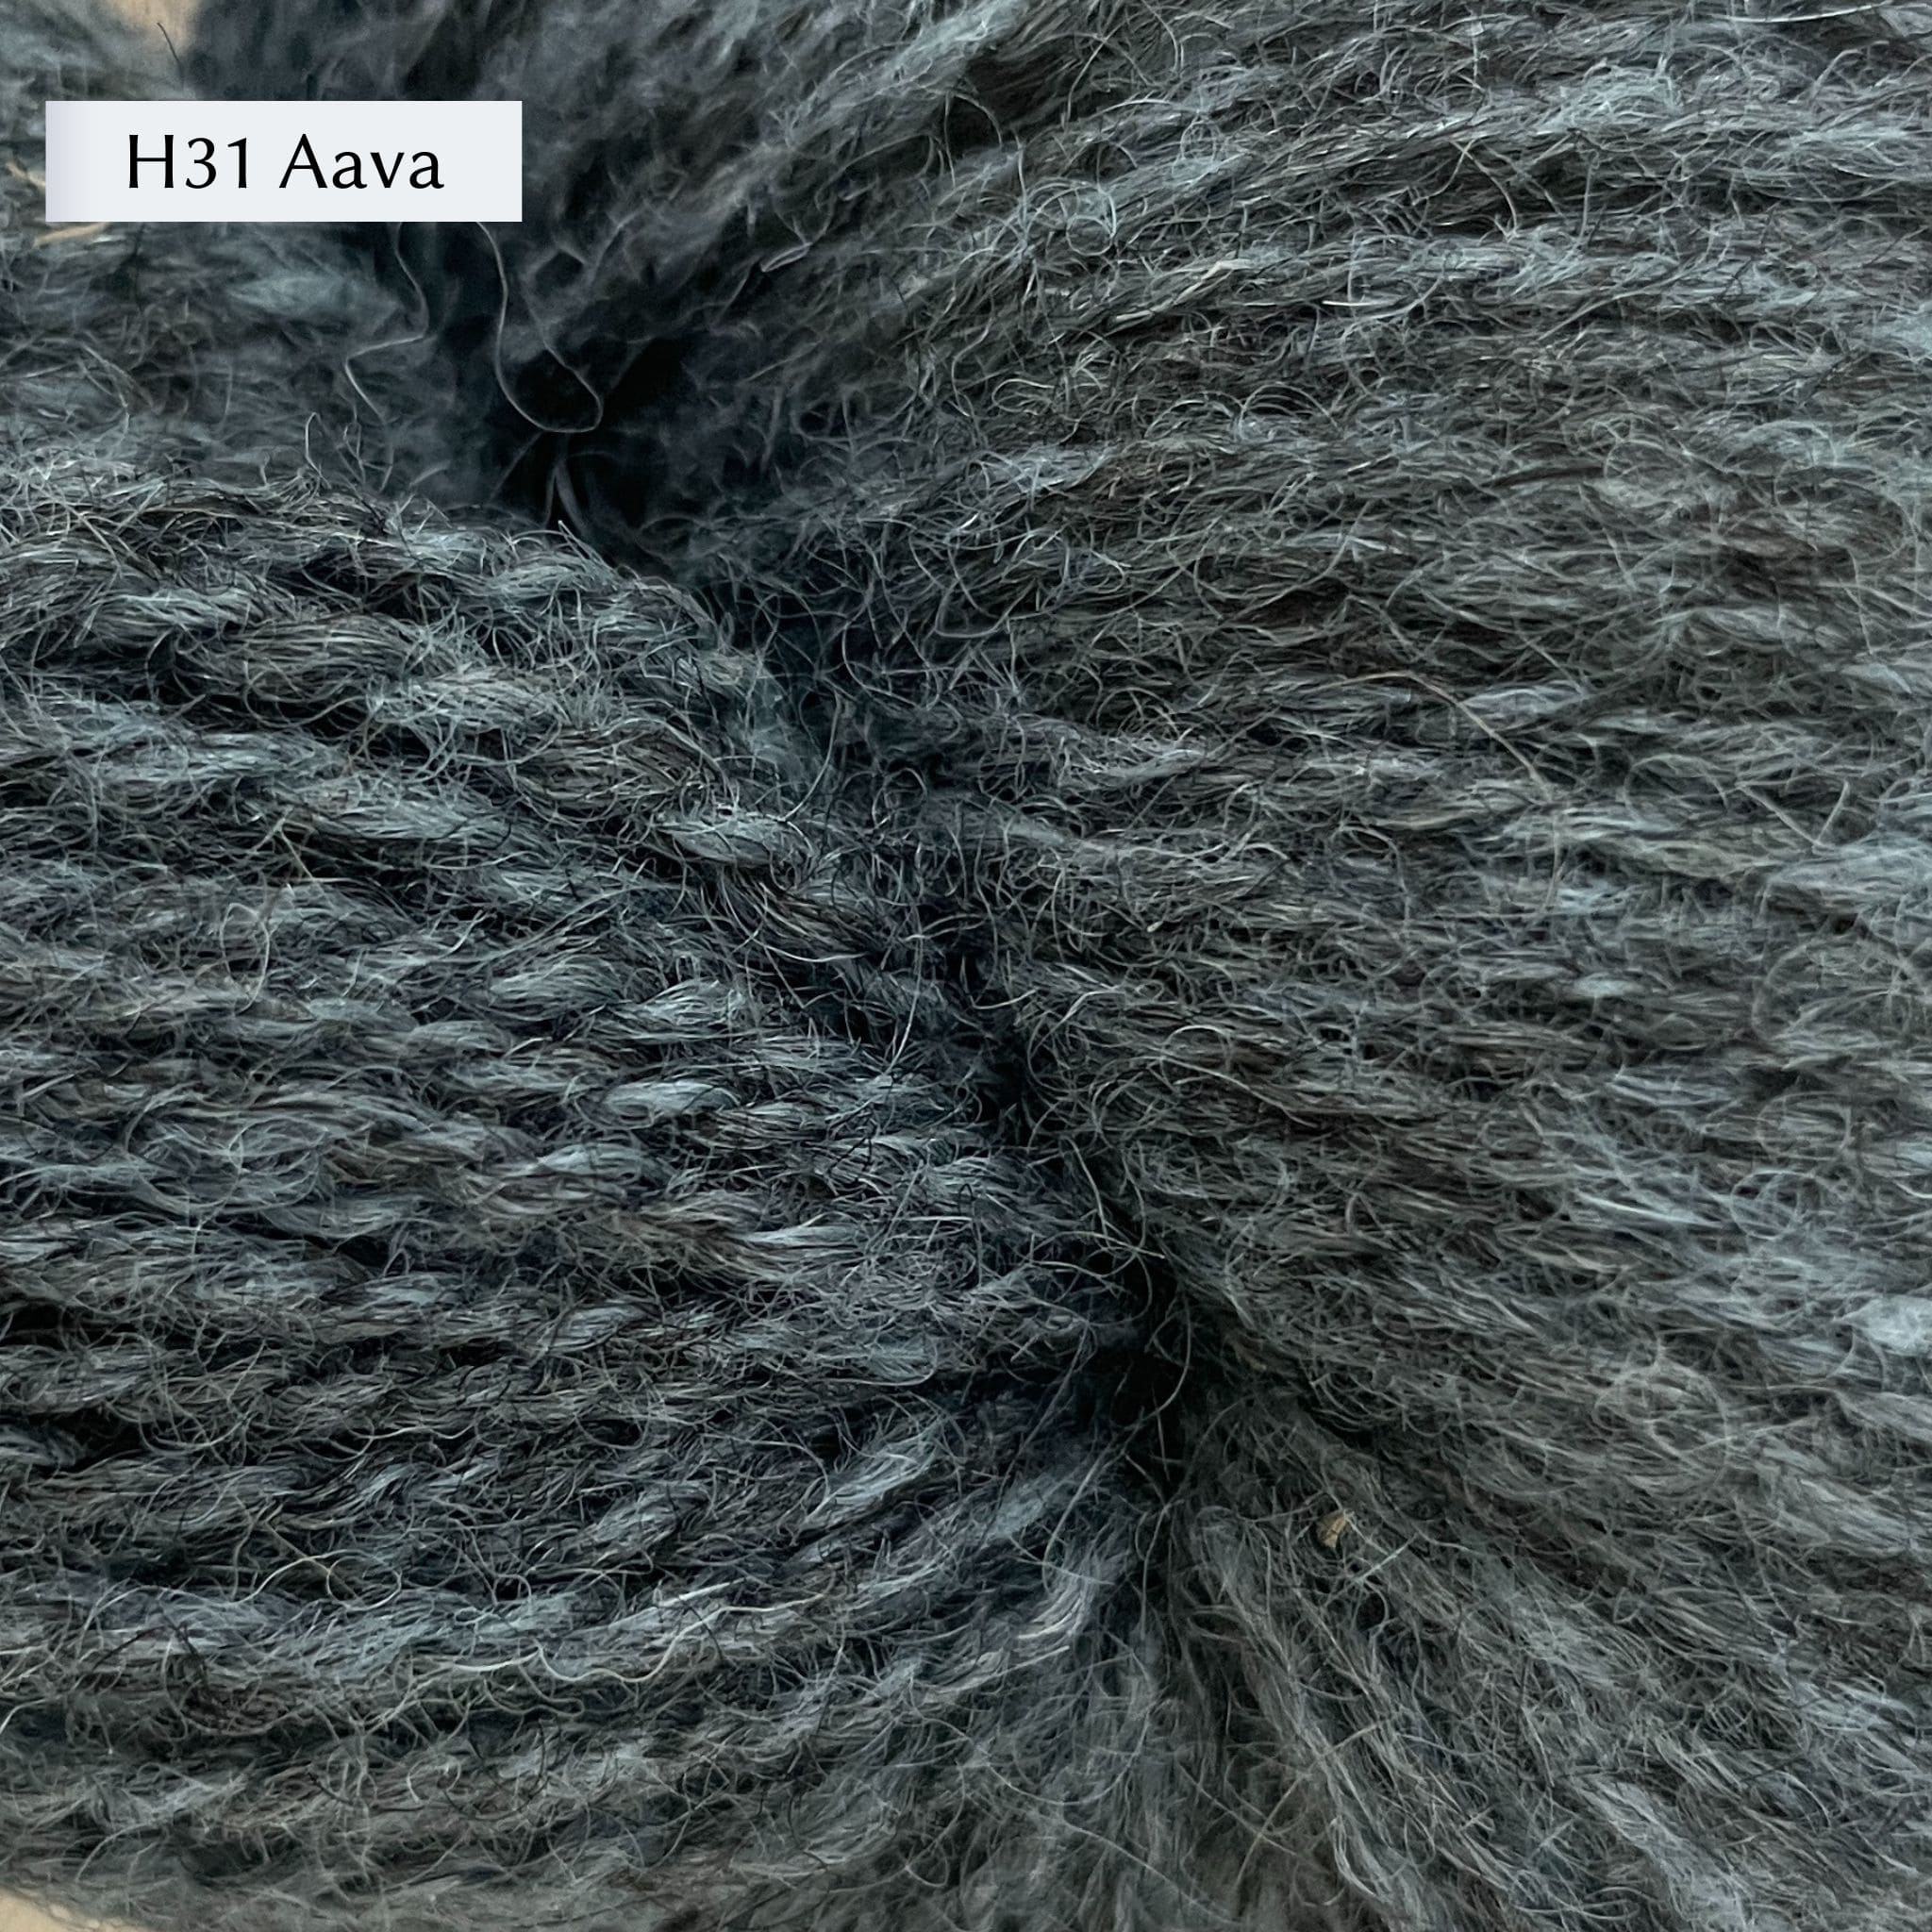 Tukuwool DK Yarn, 100% Finnish Wool shown in colorway H31 Aava which is a medium heathered blue color. 